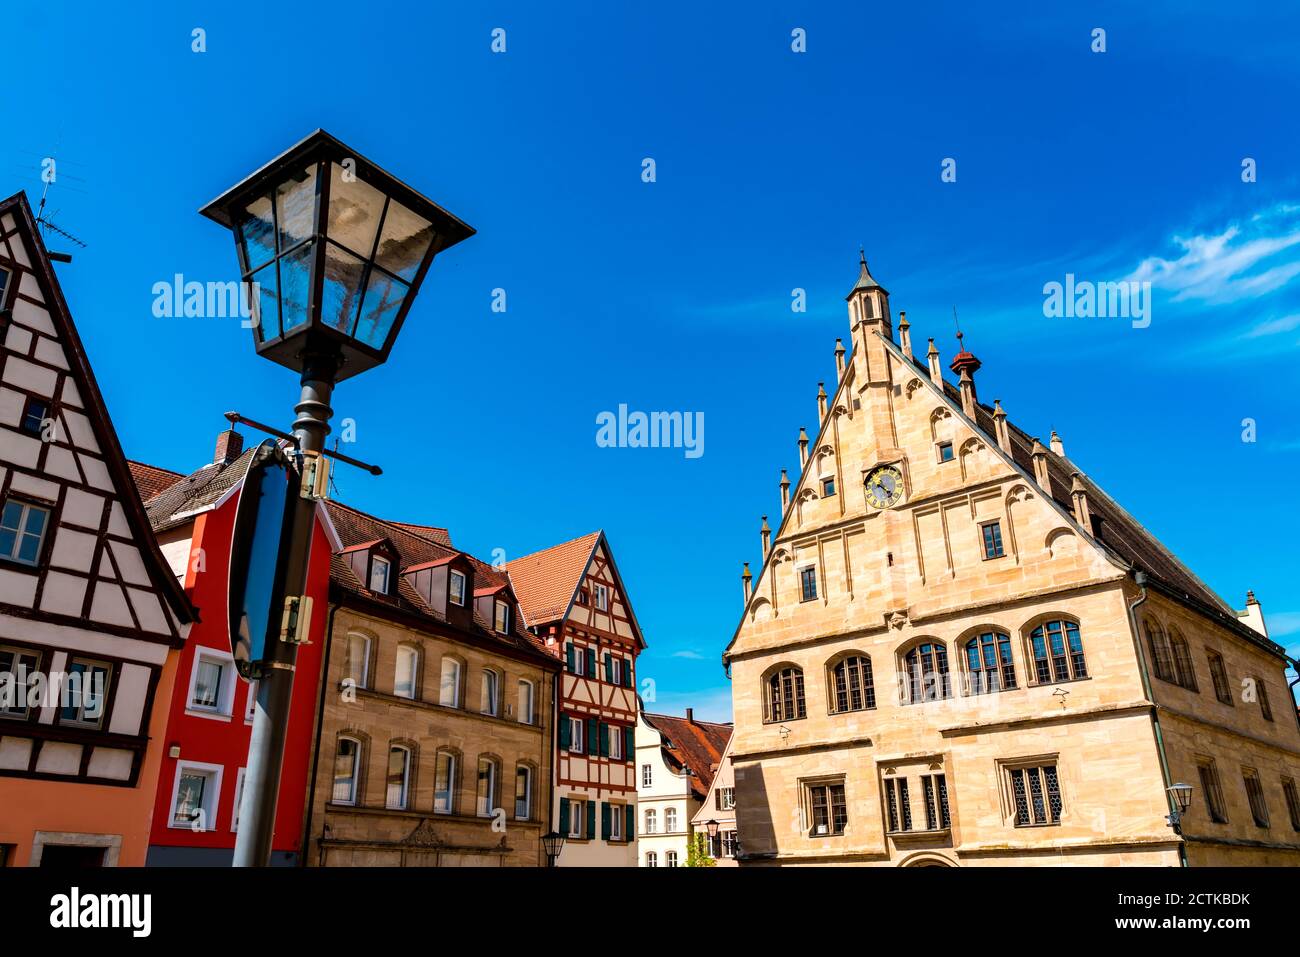 Germany, Bavaria, Weissenburg, Street light in front of historic town houses Stock Photo